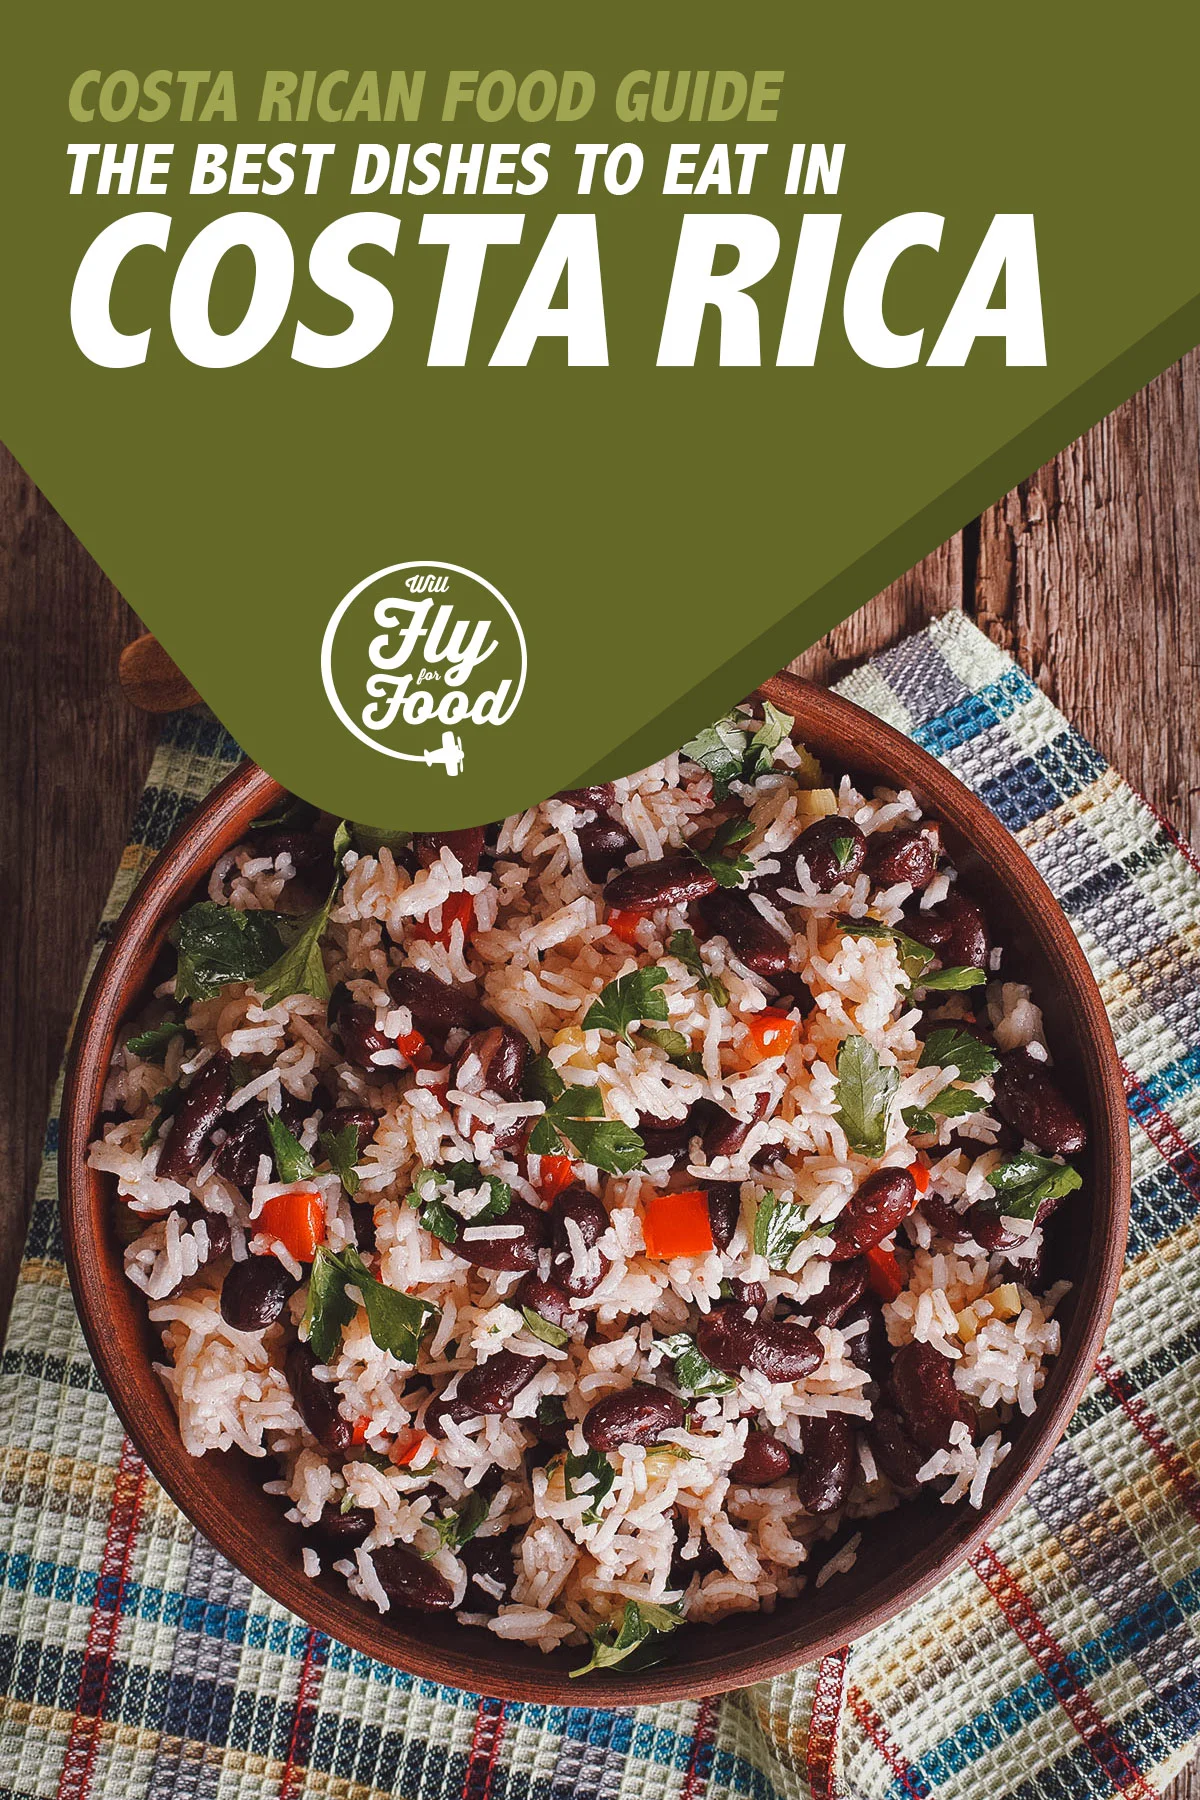 Gallo pinto, Costa Rican rice and beans